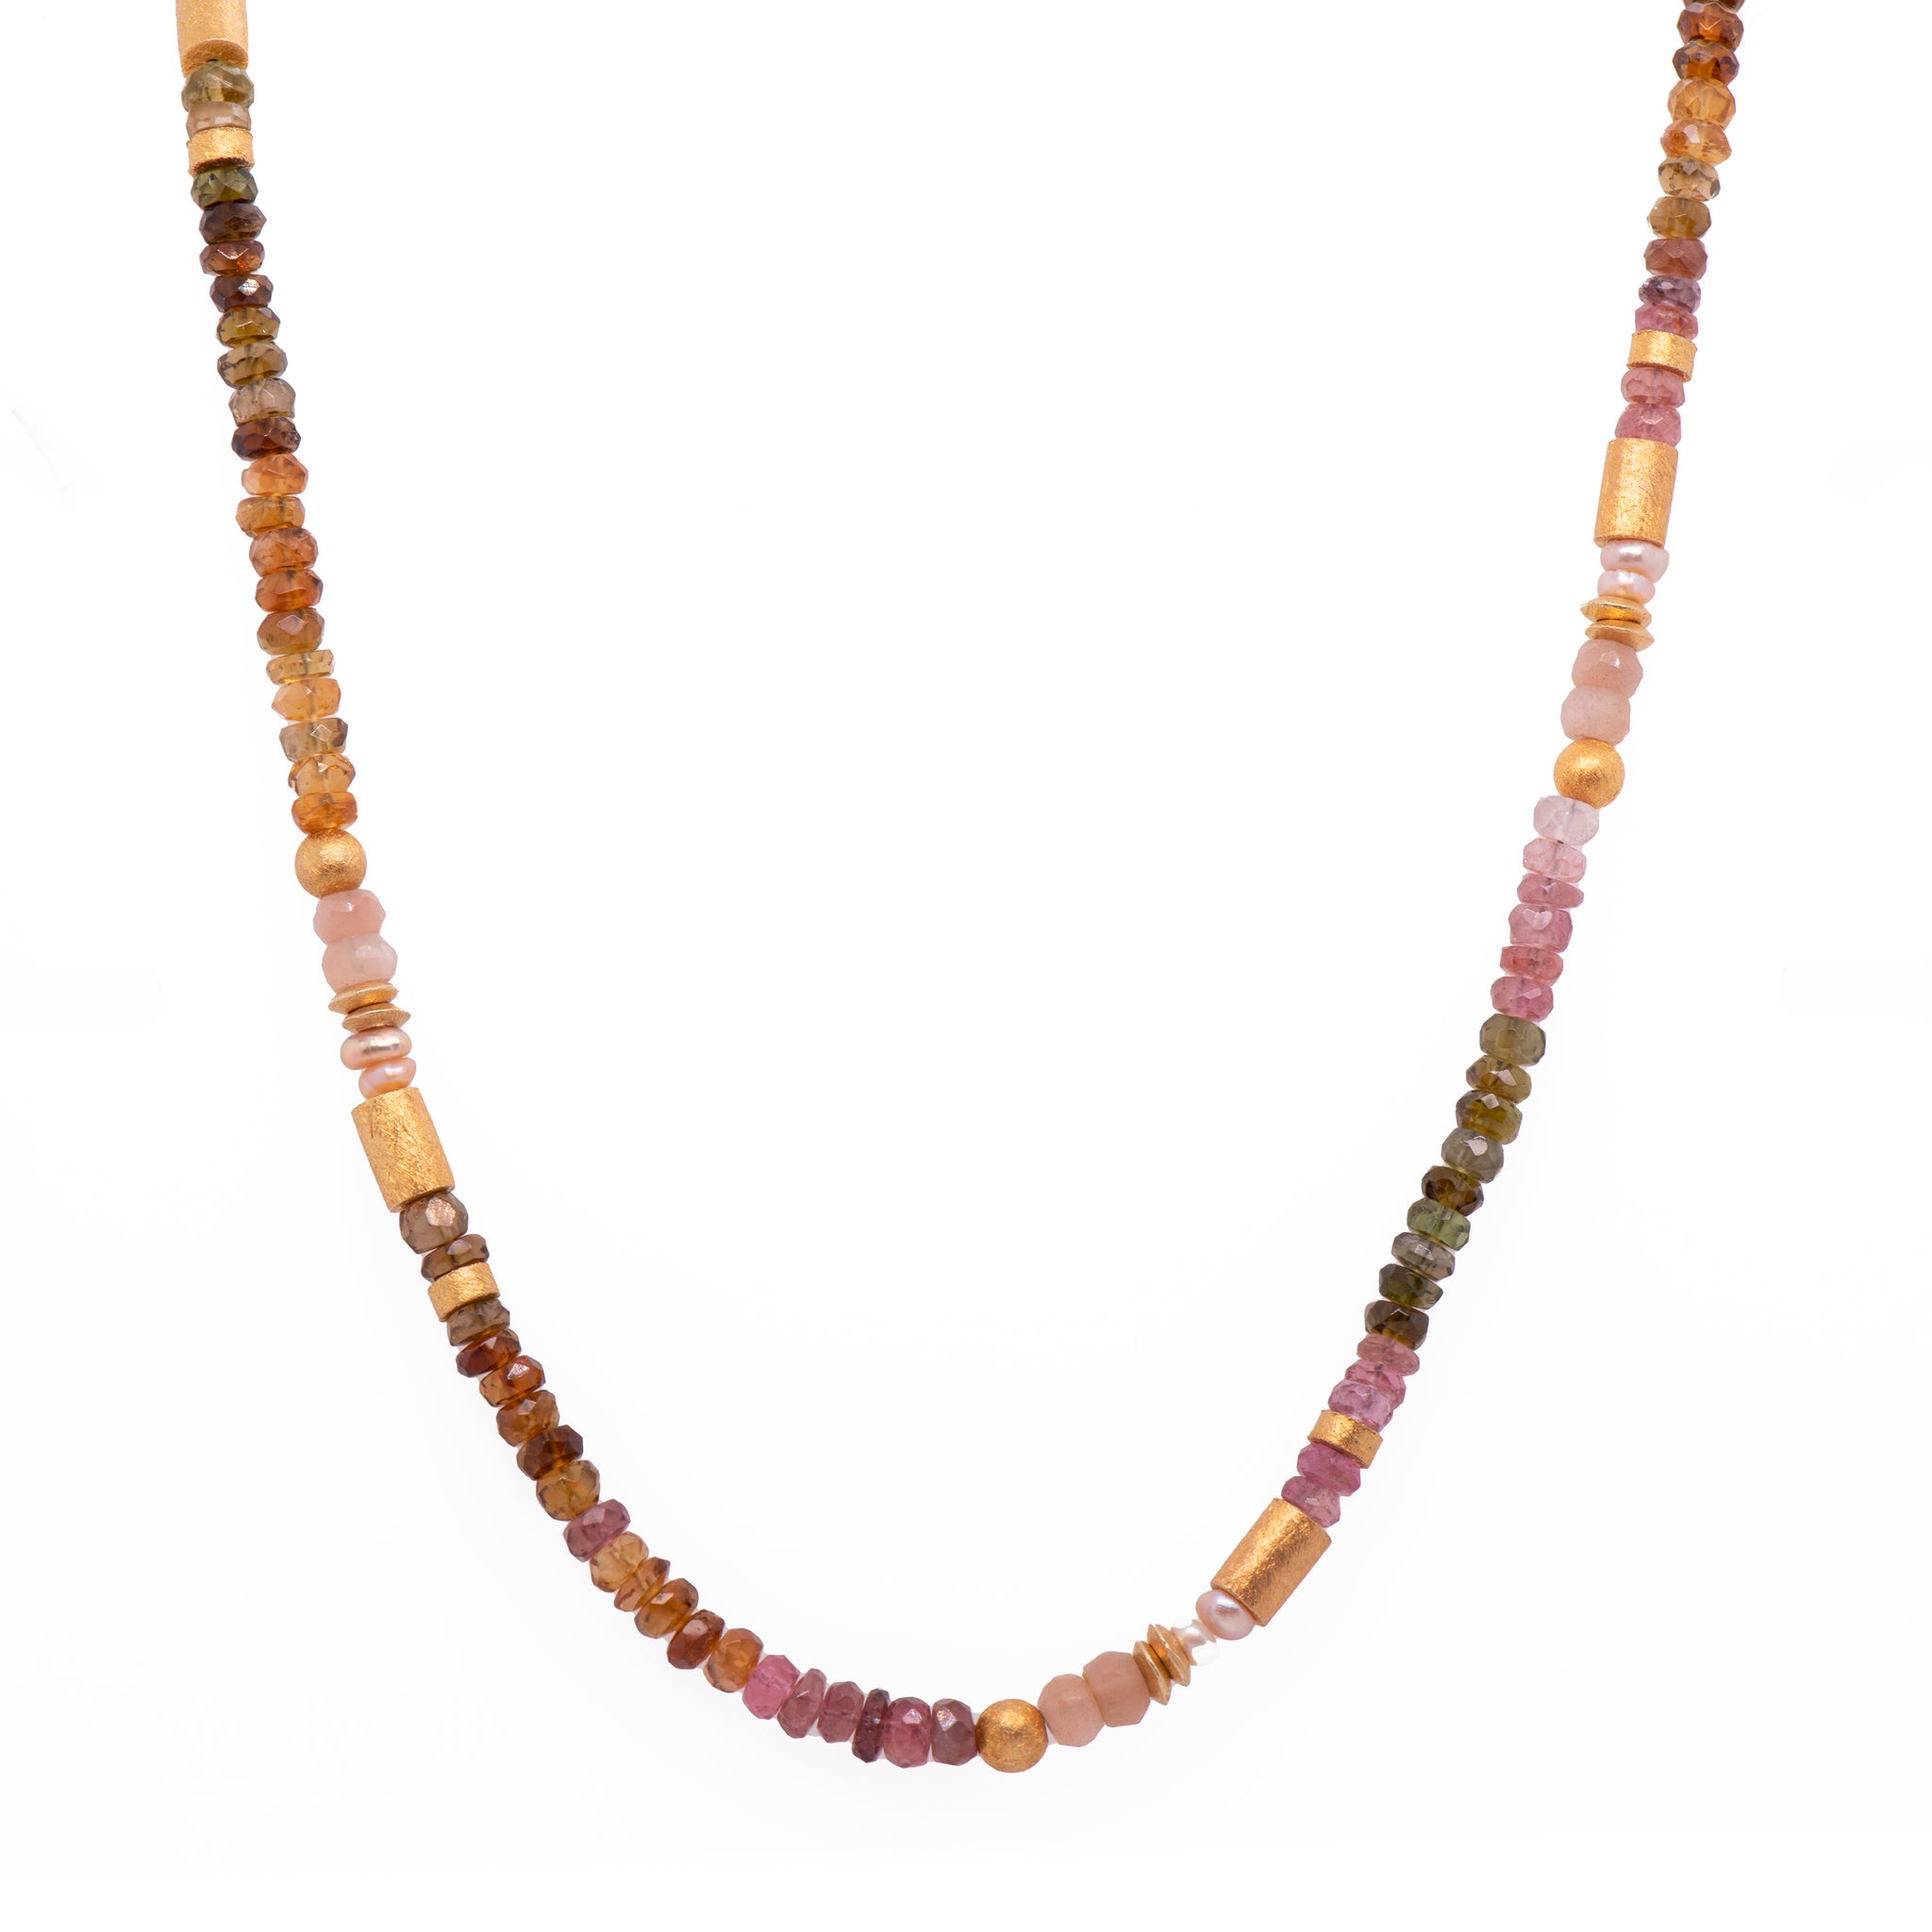 Tourmaline, Rainbow Moonstone And Pearl Necklace 24K Fair Trade Gold Vermeil